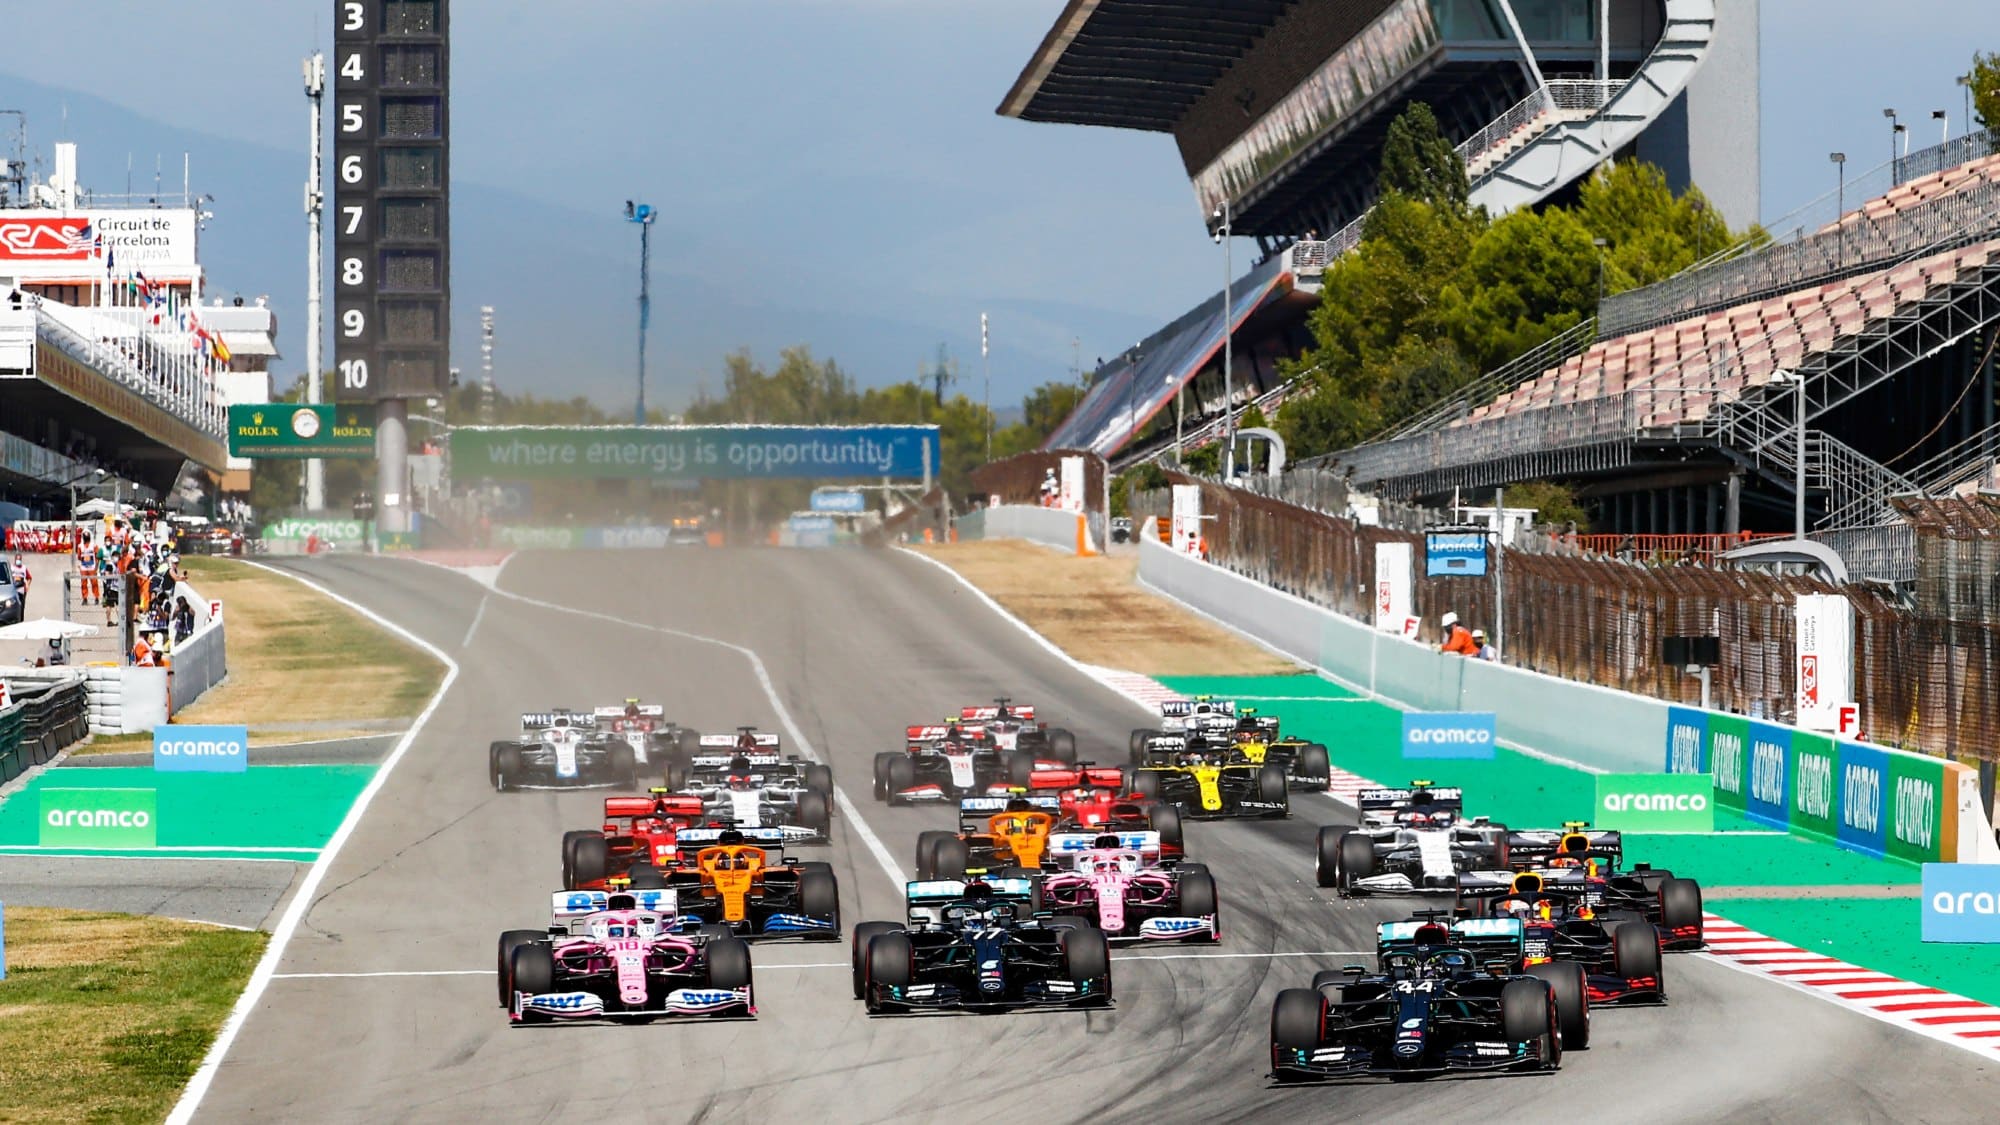 2021 Spanish Grand Prix what to watch for